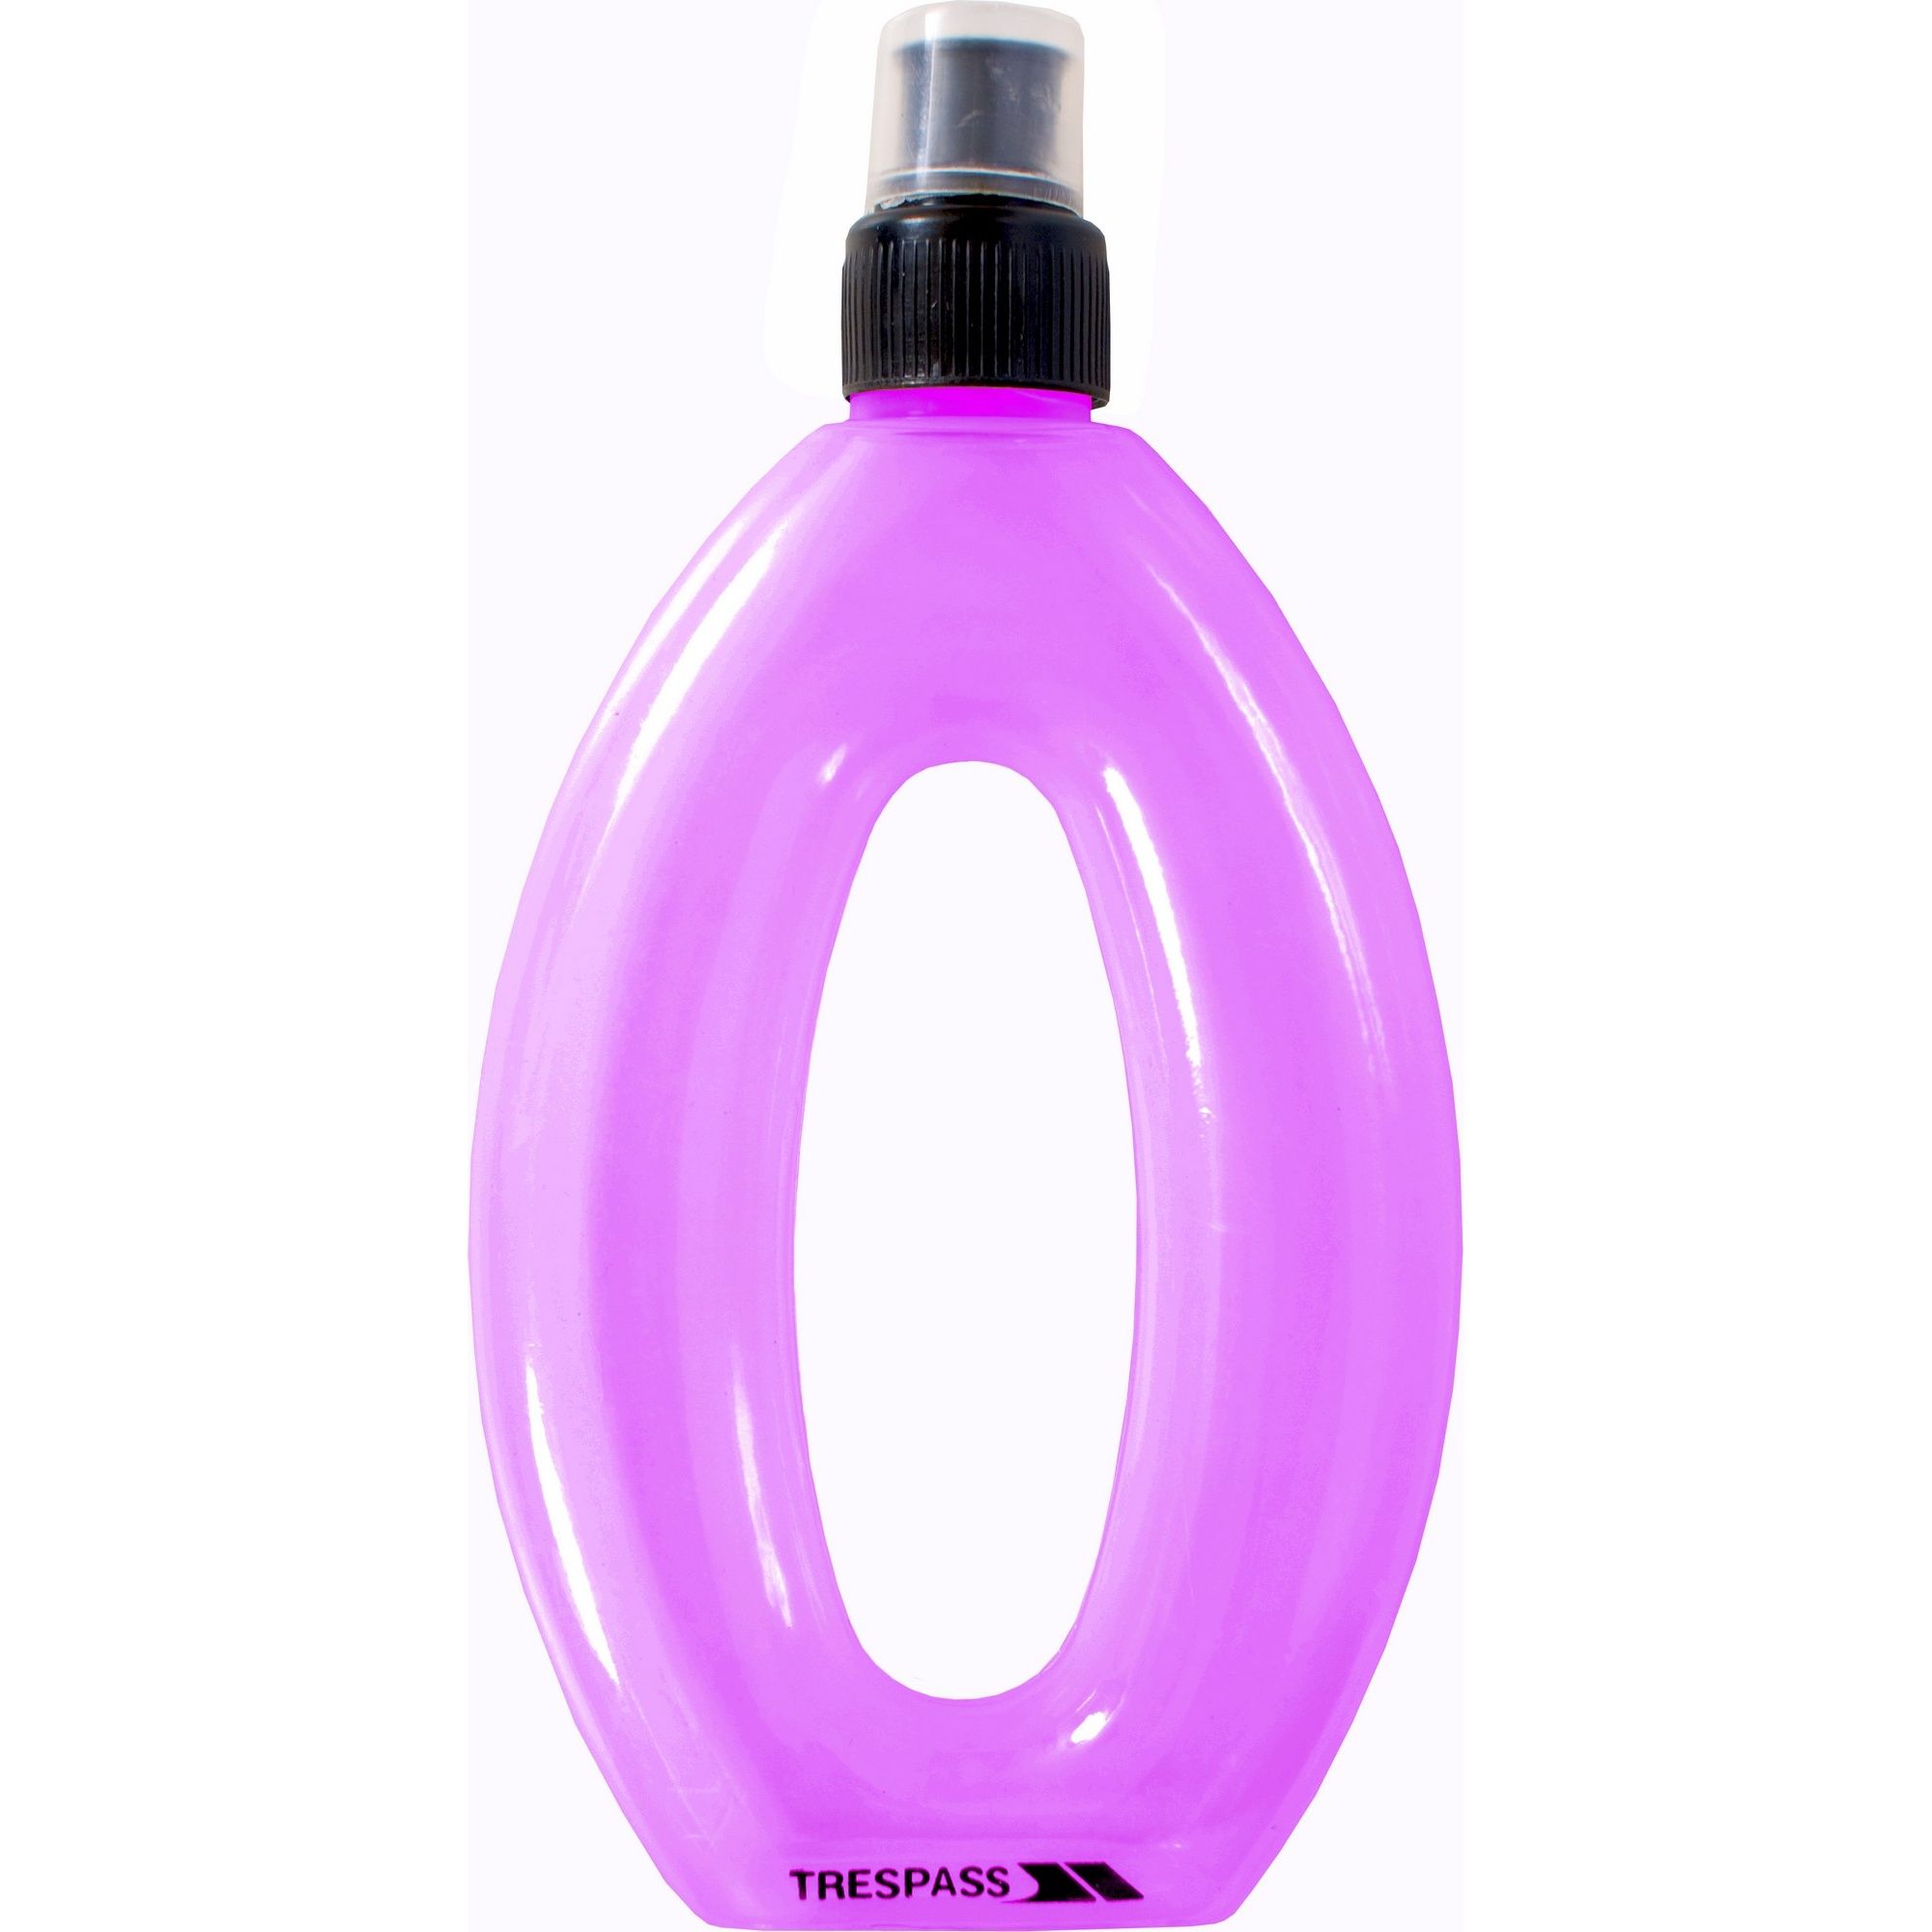 Material: 100% plastic. Easy grip bottle. 350ml. Ideal for runners. Sports cap lid. 220 x 120mm.